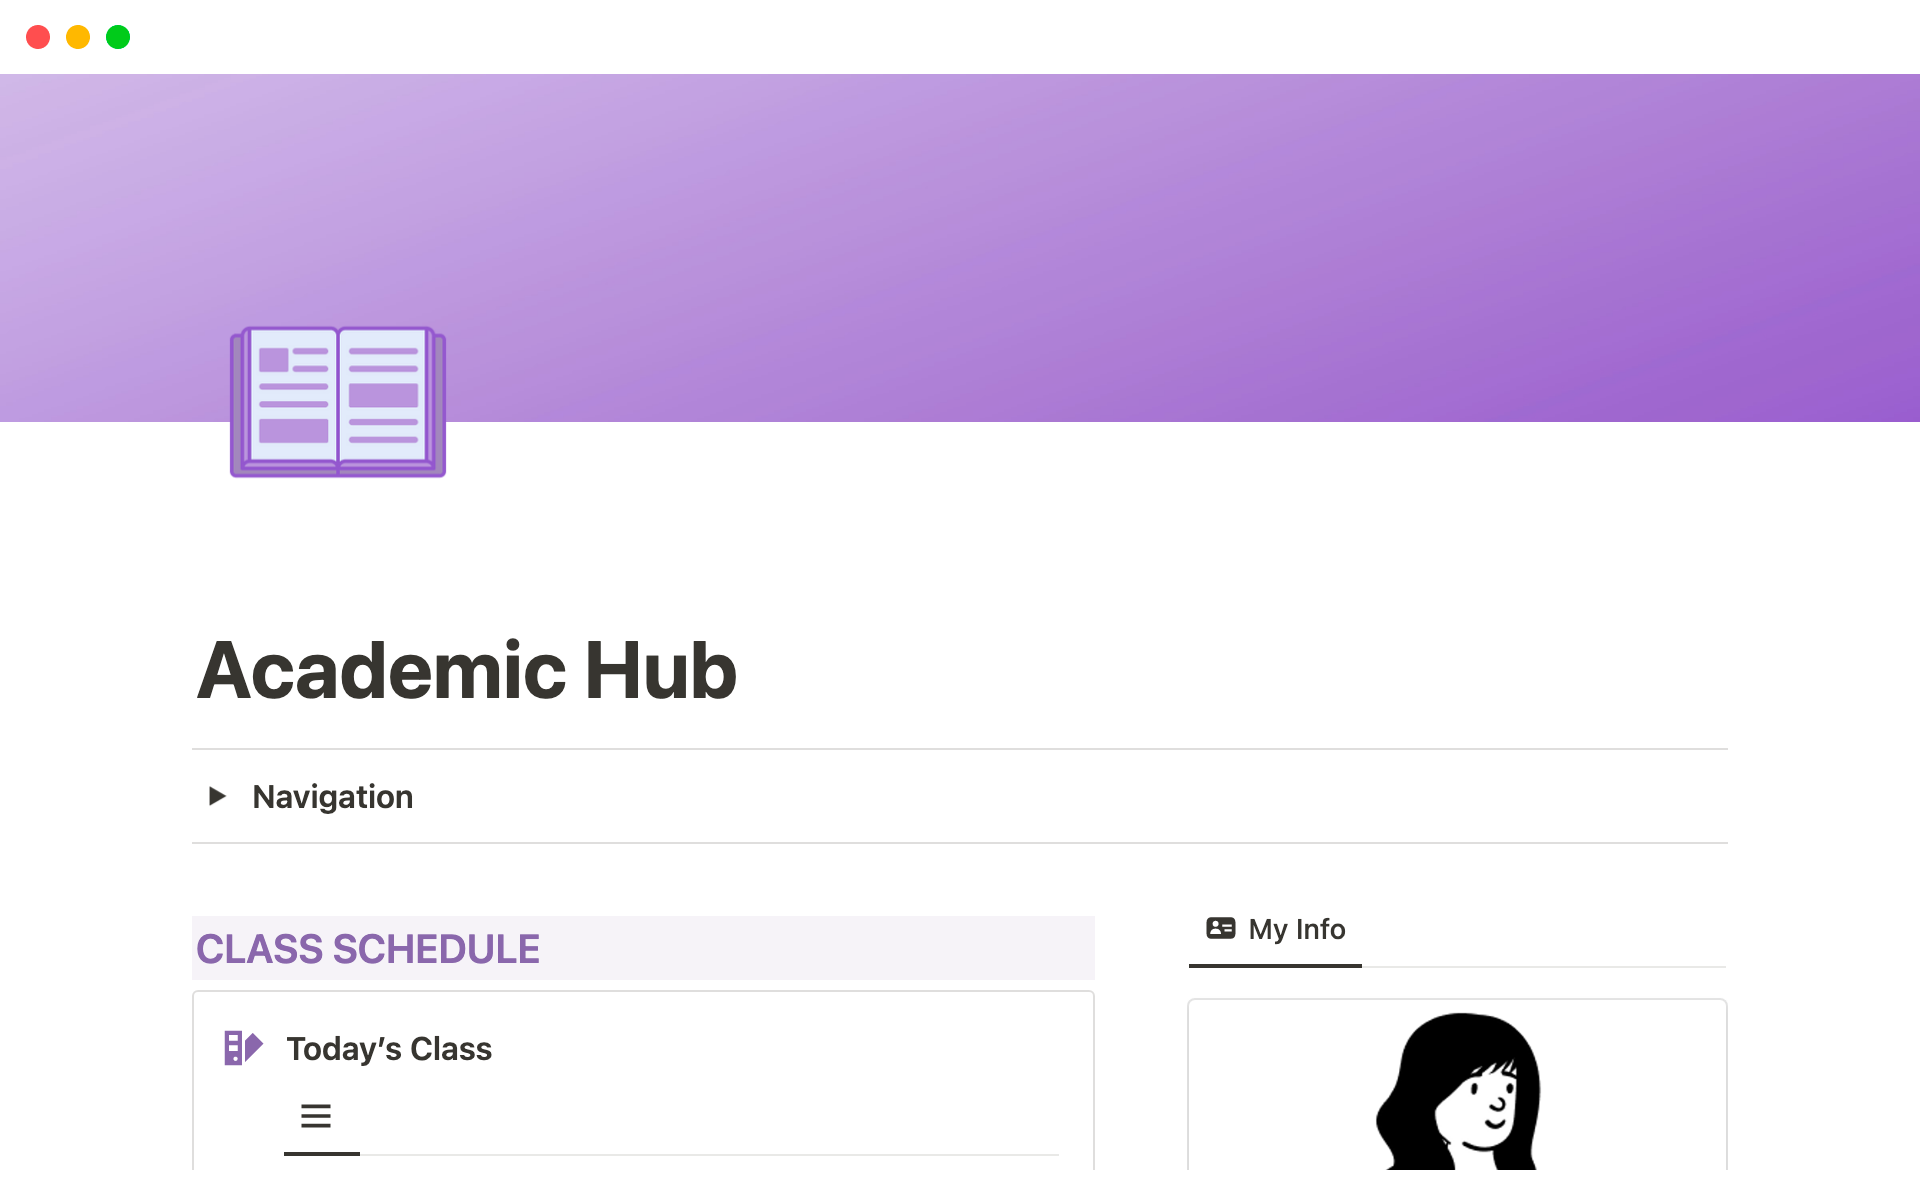 The Academic Hub is an all-in-one tool that enables you to manage classes, events, take notes, track assignments, maintain to-do lists, and handle projects in one place